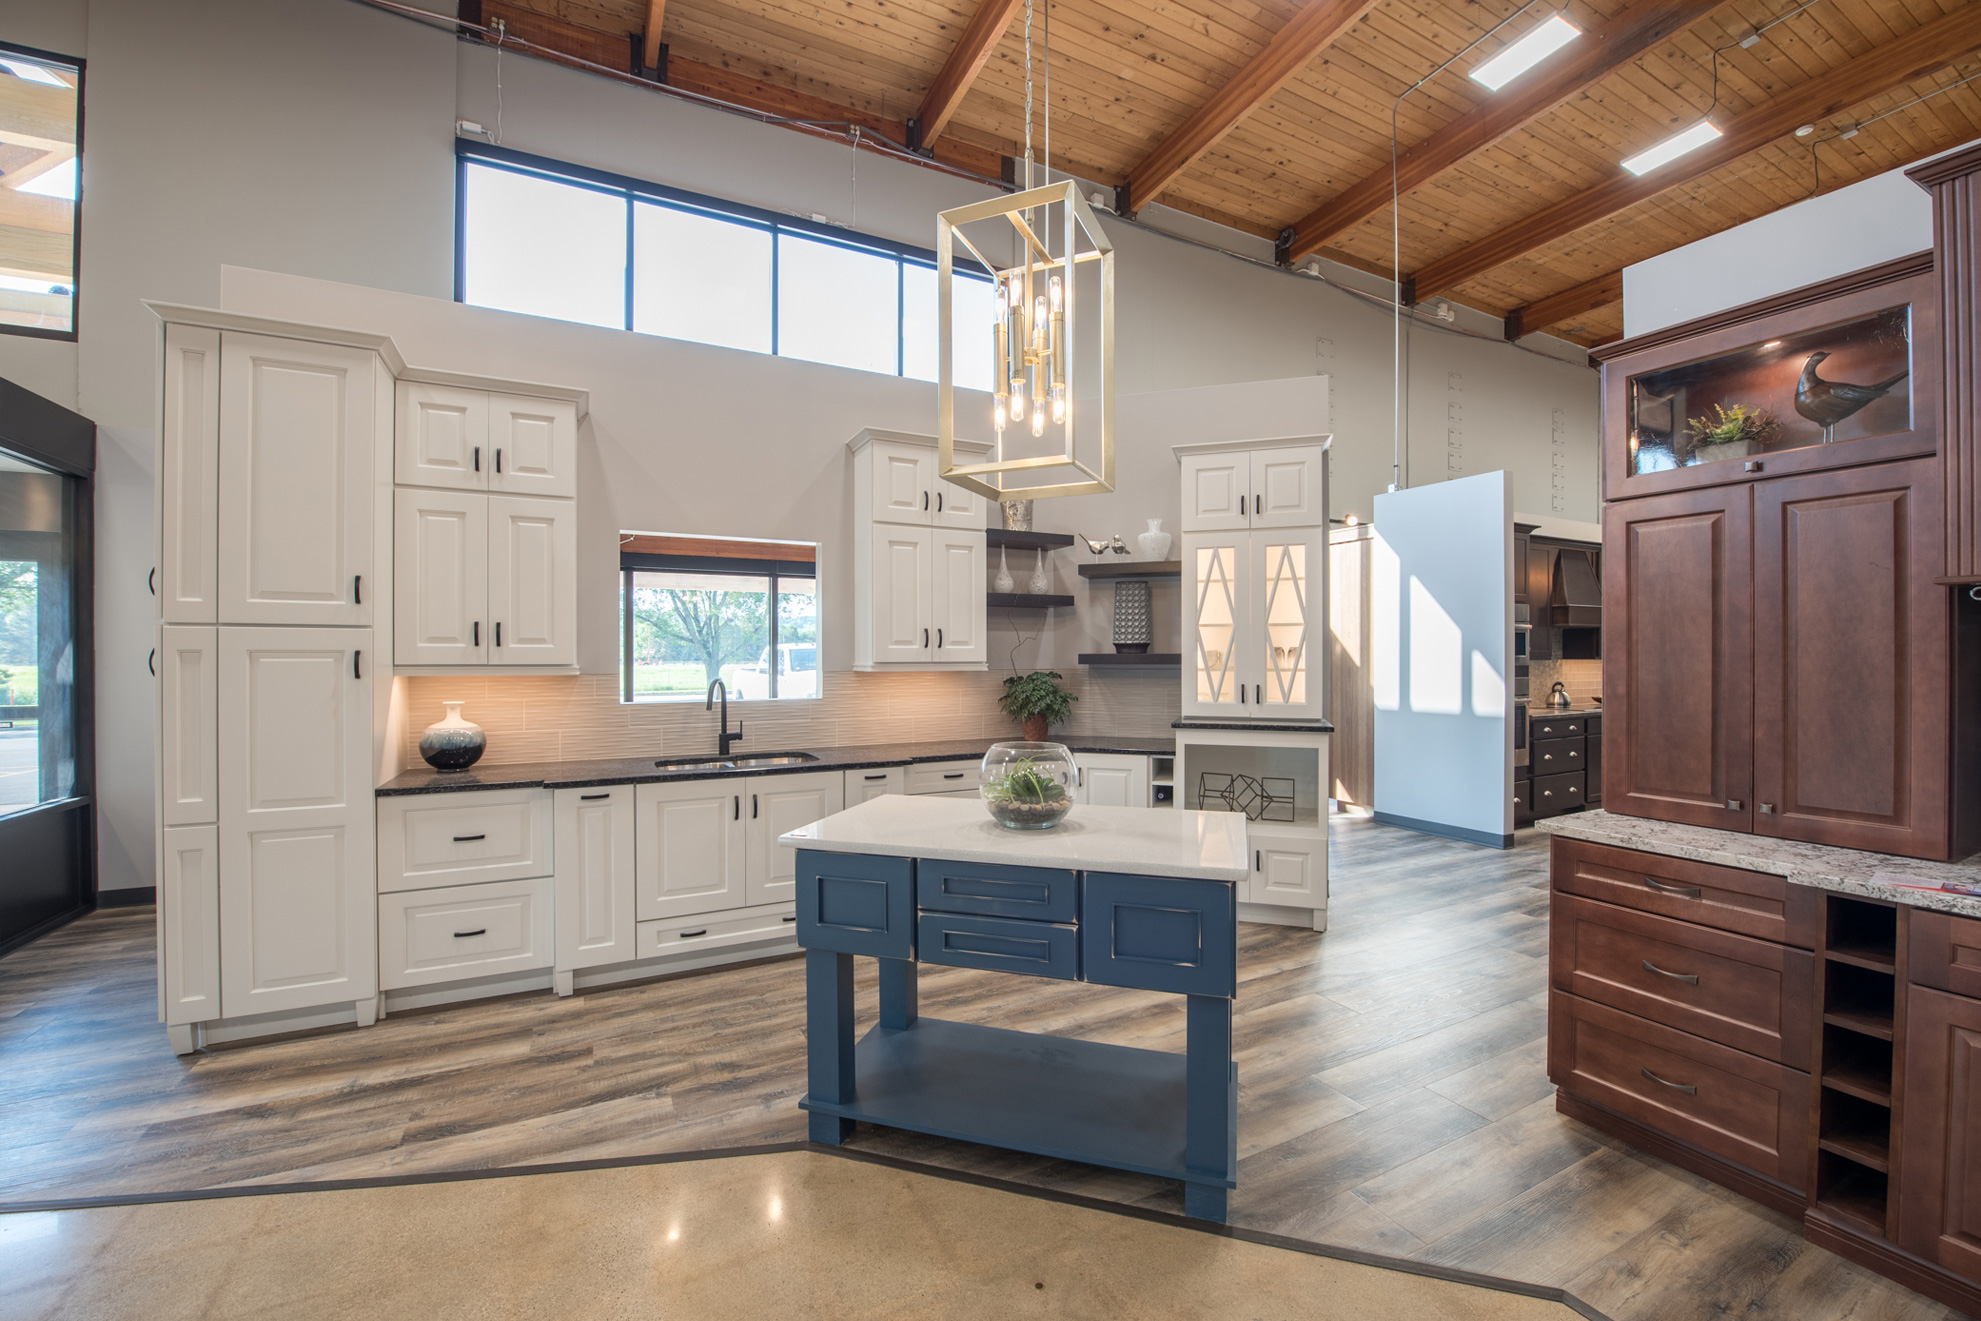 Our large showroom offers cabinetry for every style, decor & budget